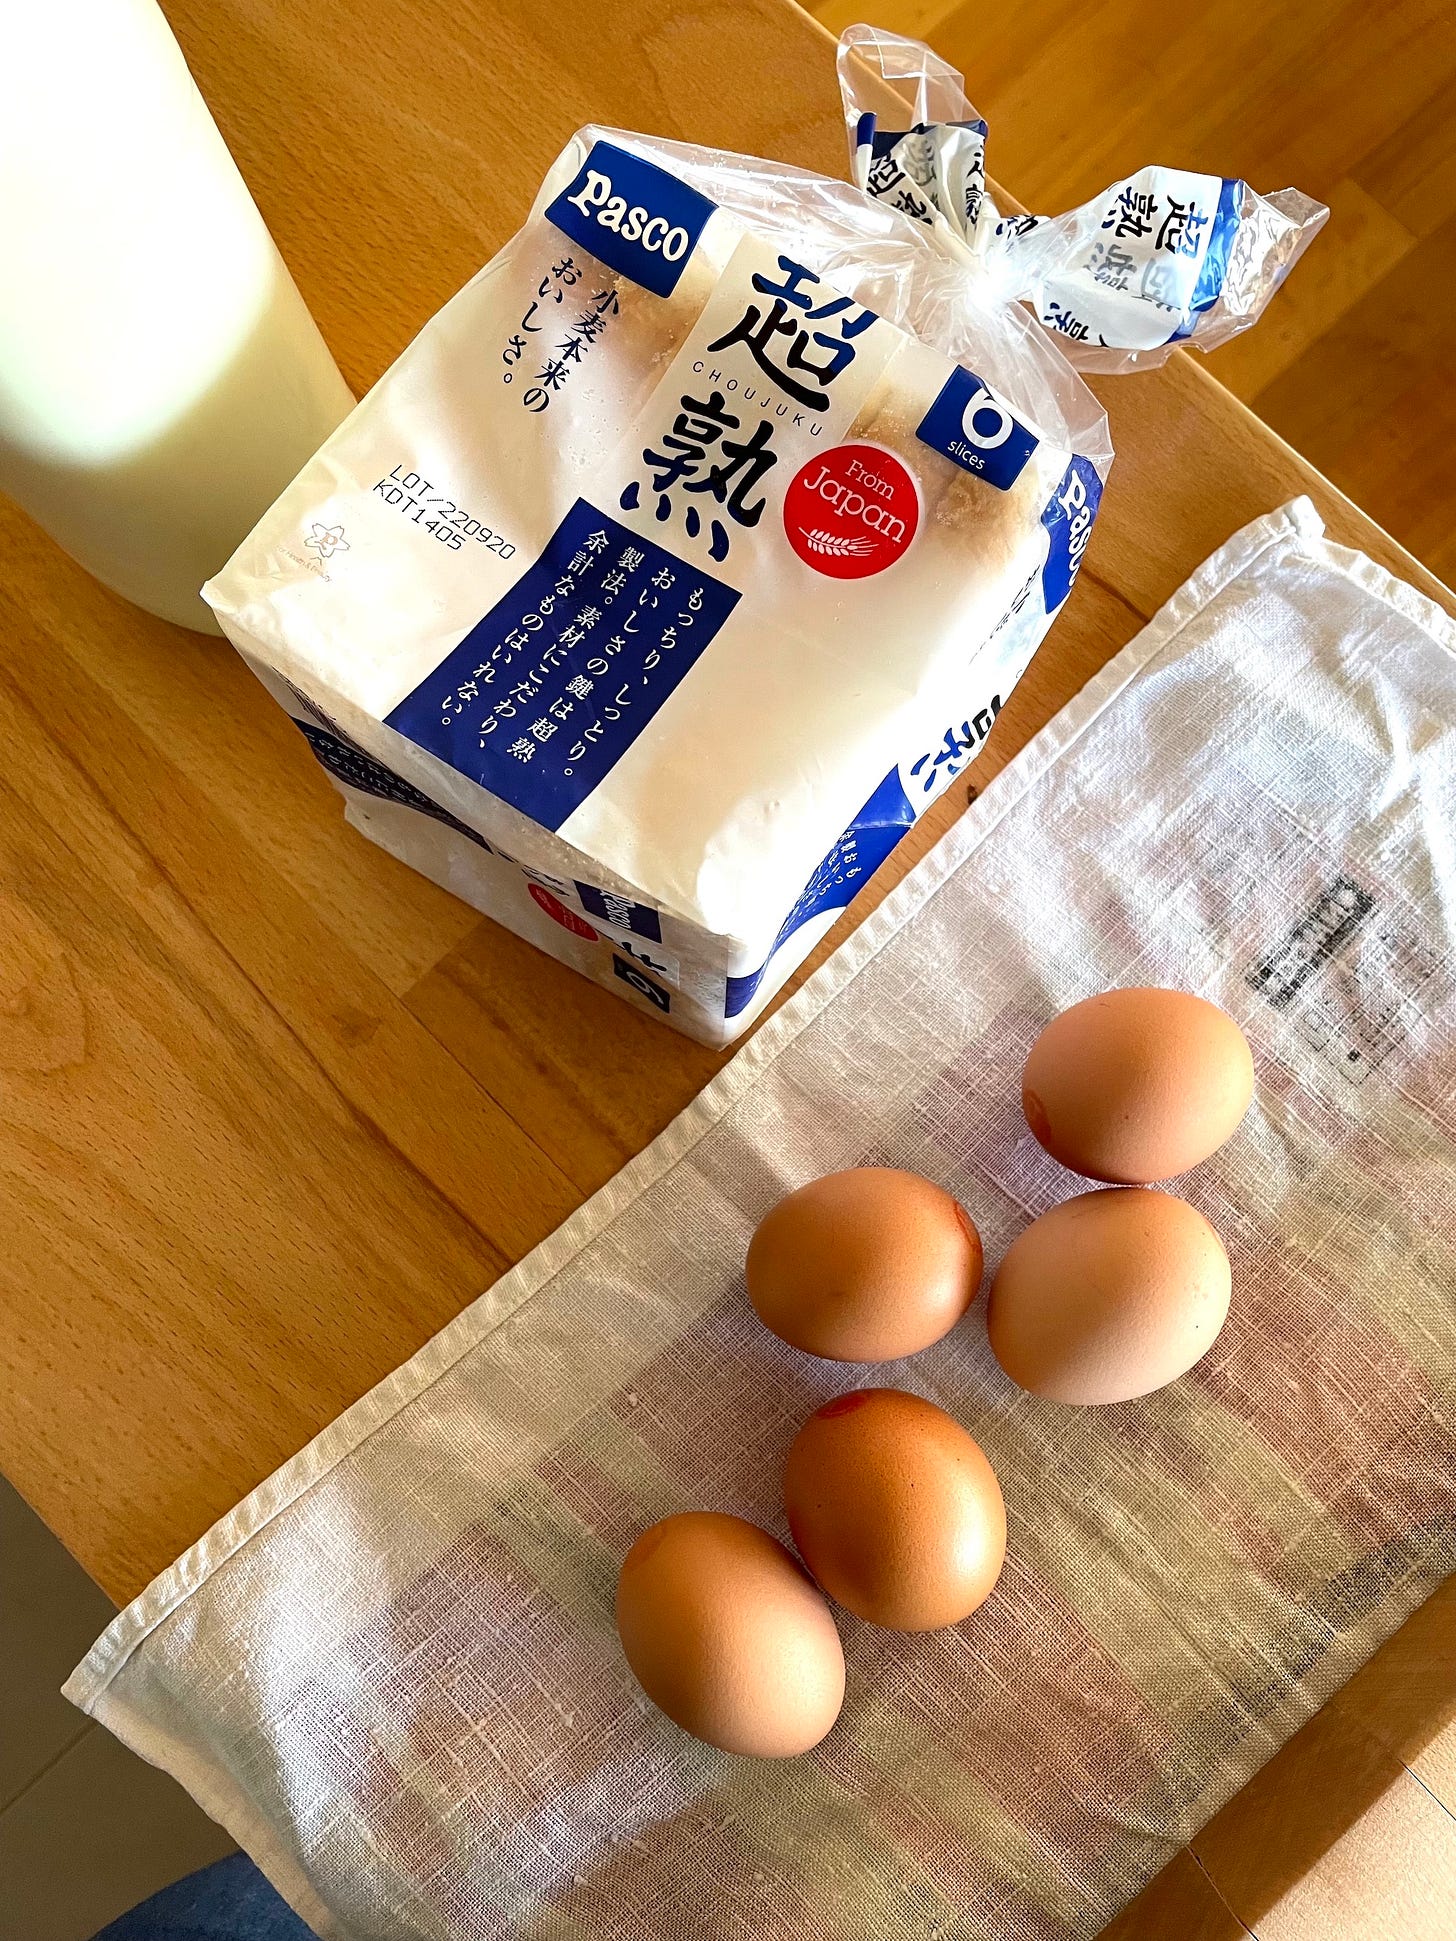 Packet of milk bread with a bottle of milk and five eggs